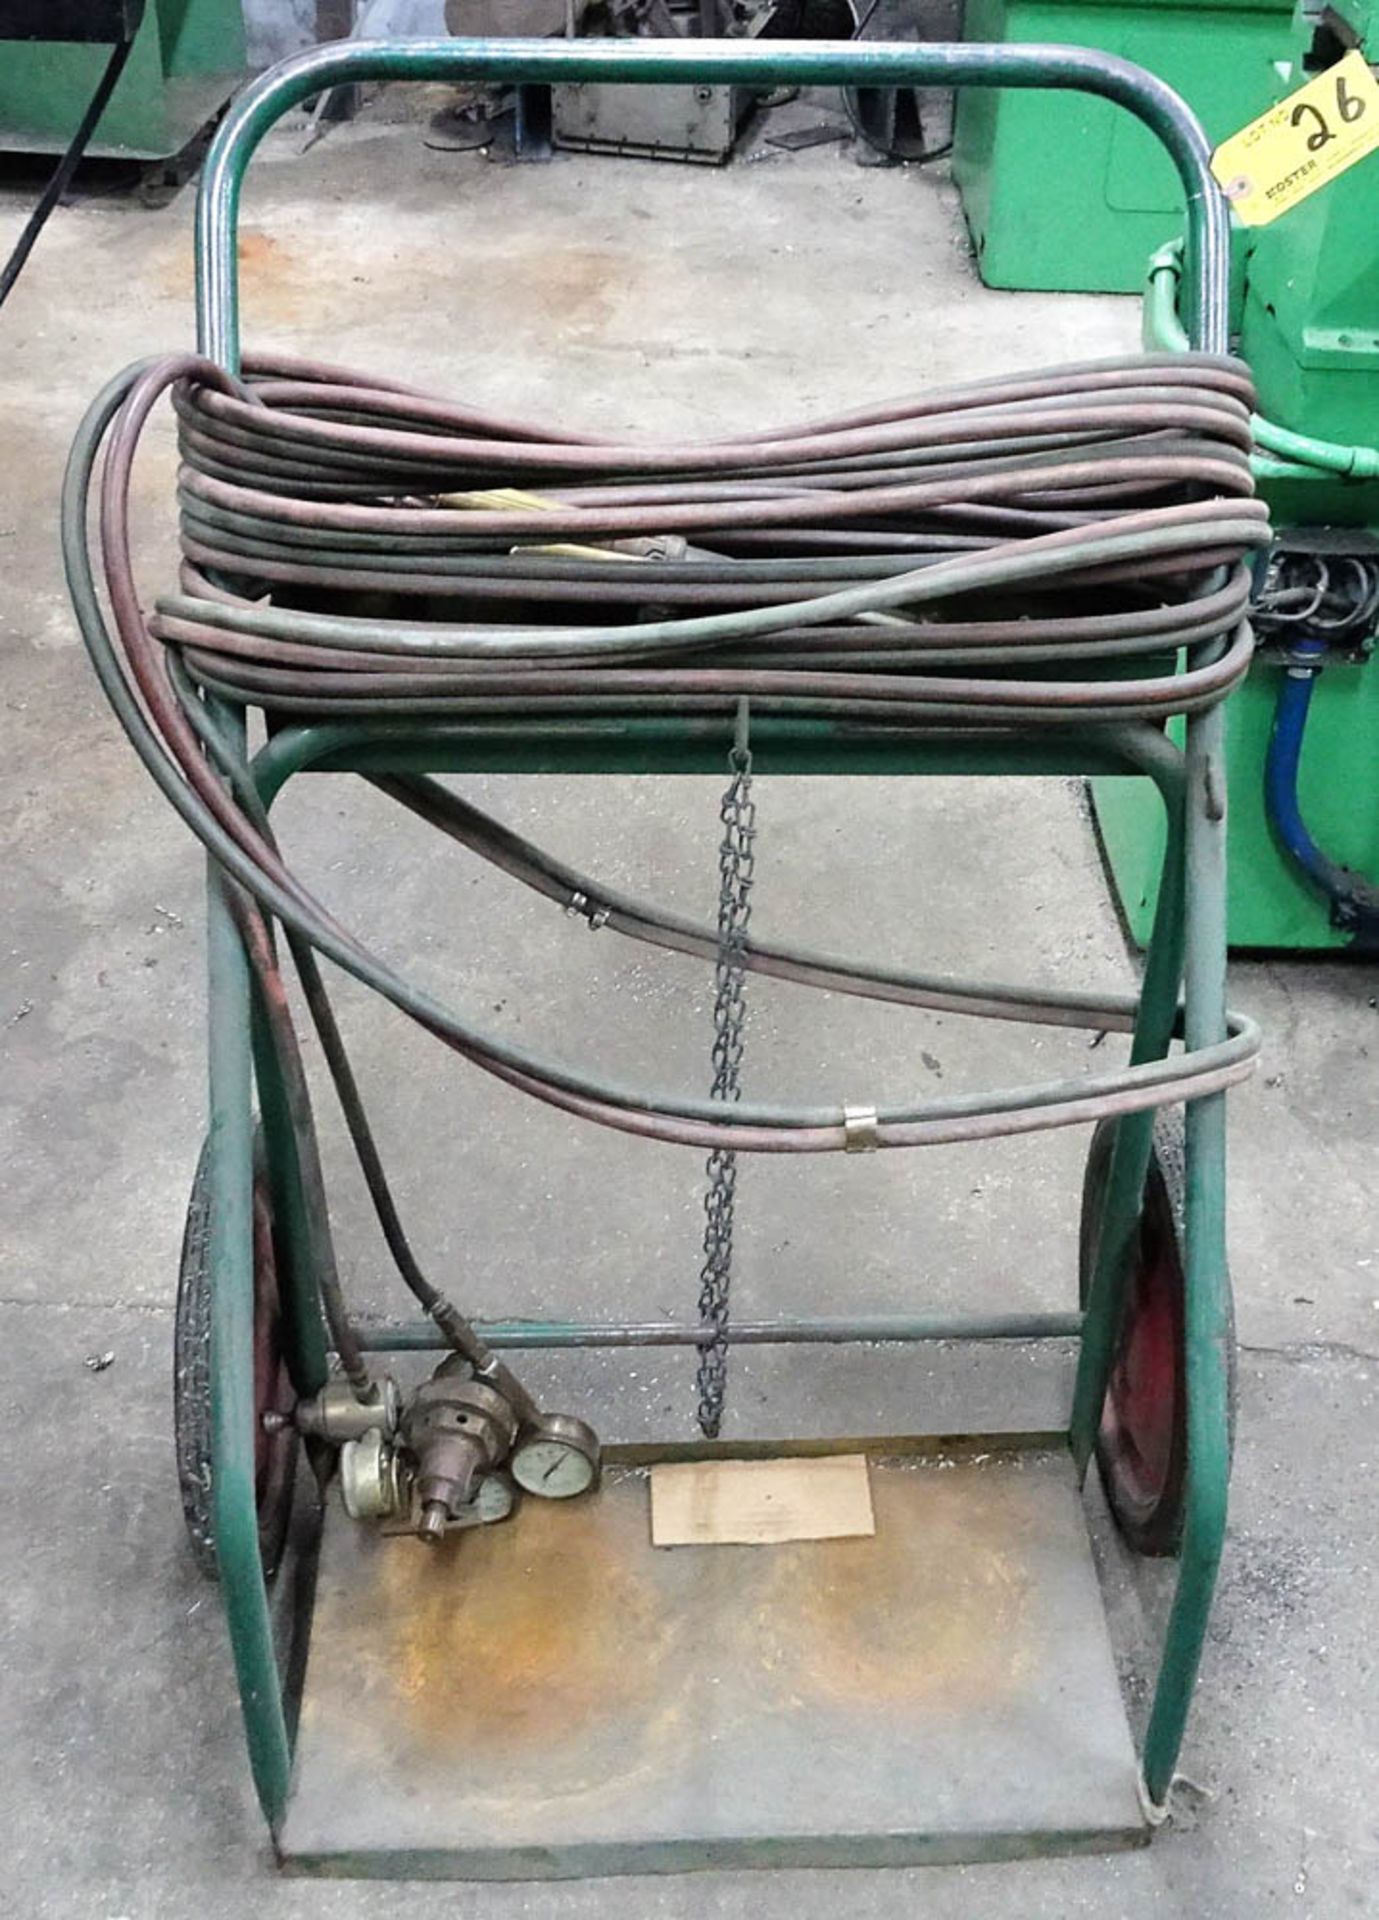 2 WHEELED TORCH CART WITH ASSOCIATED REGULATORS, HOSES AND TORCH HEADS